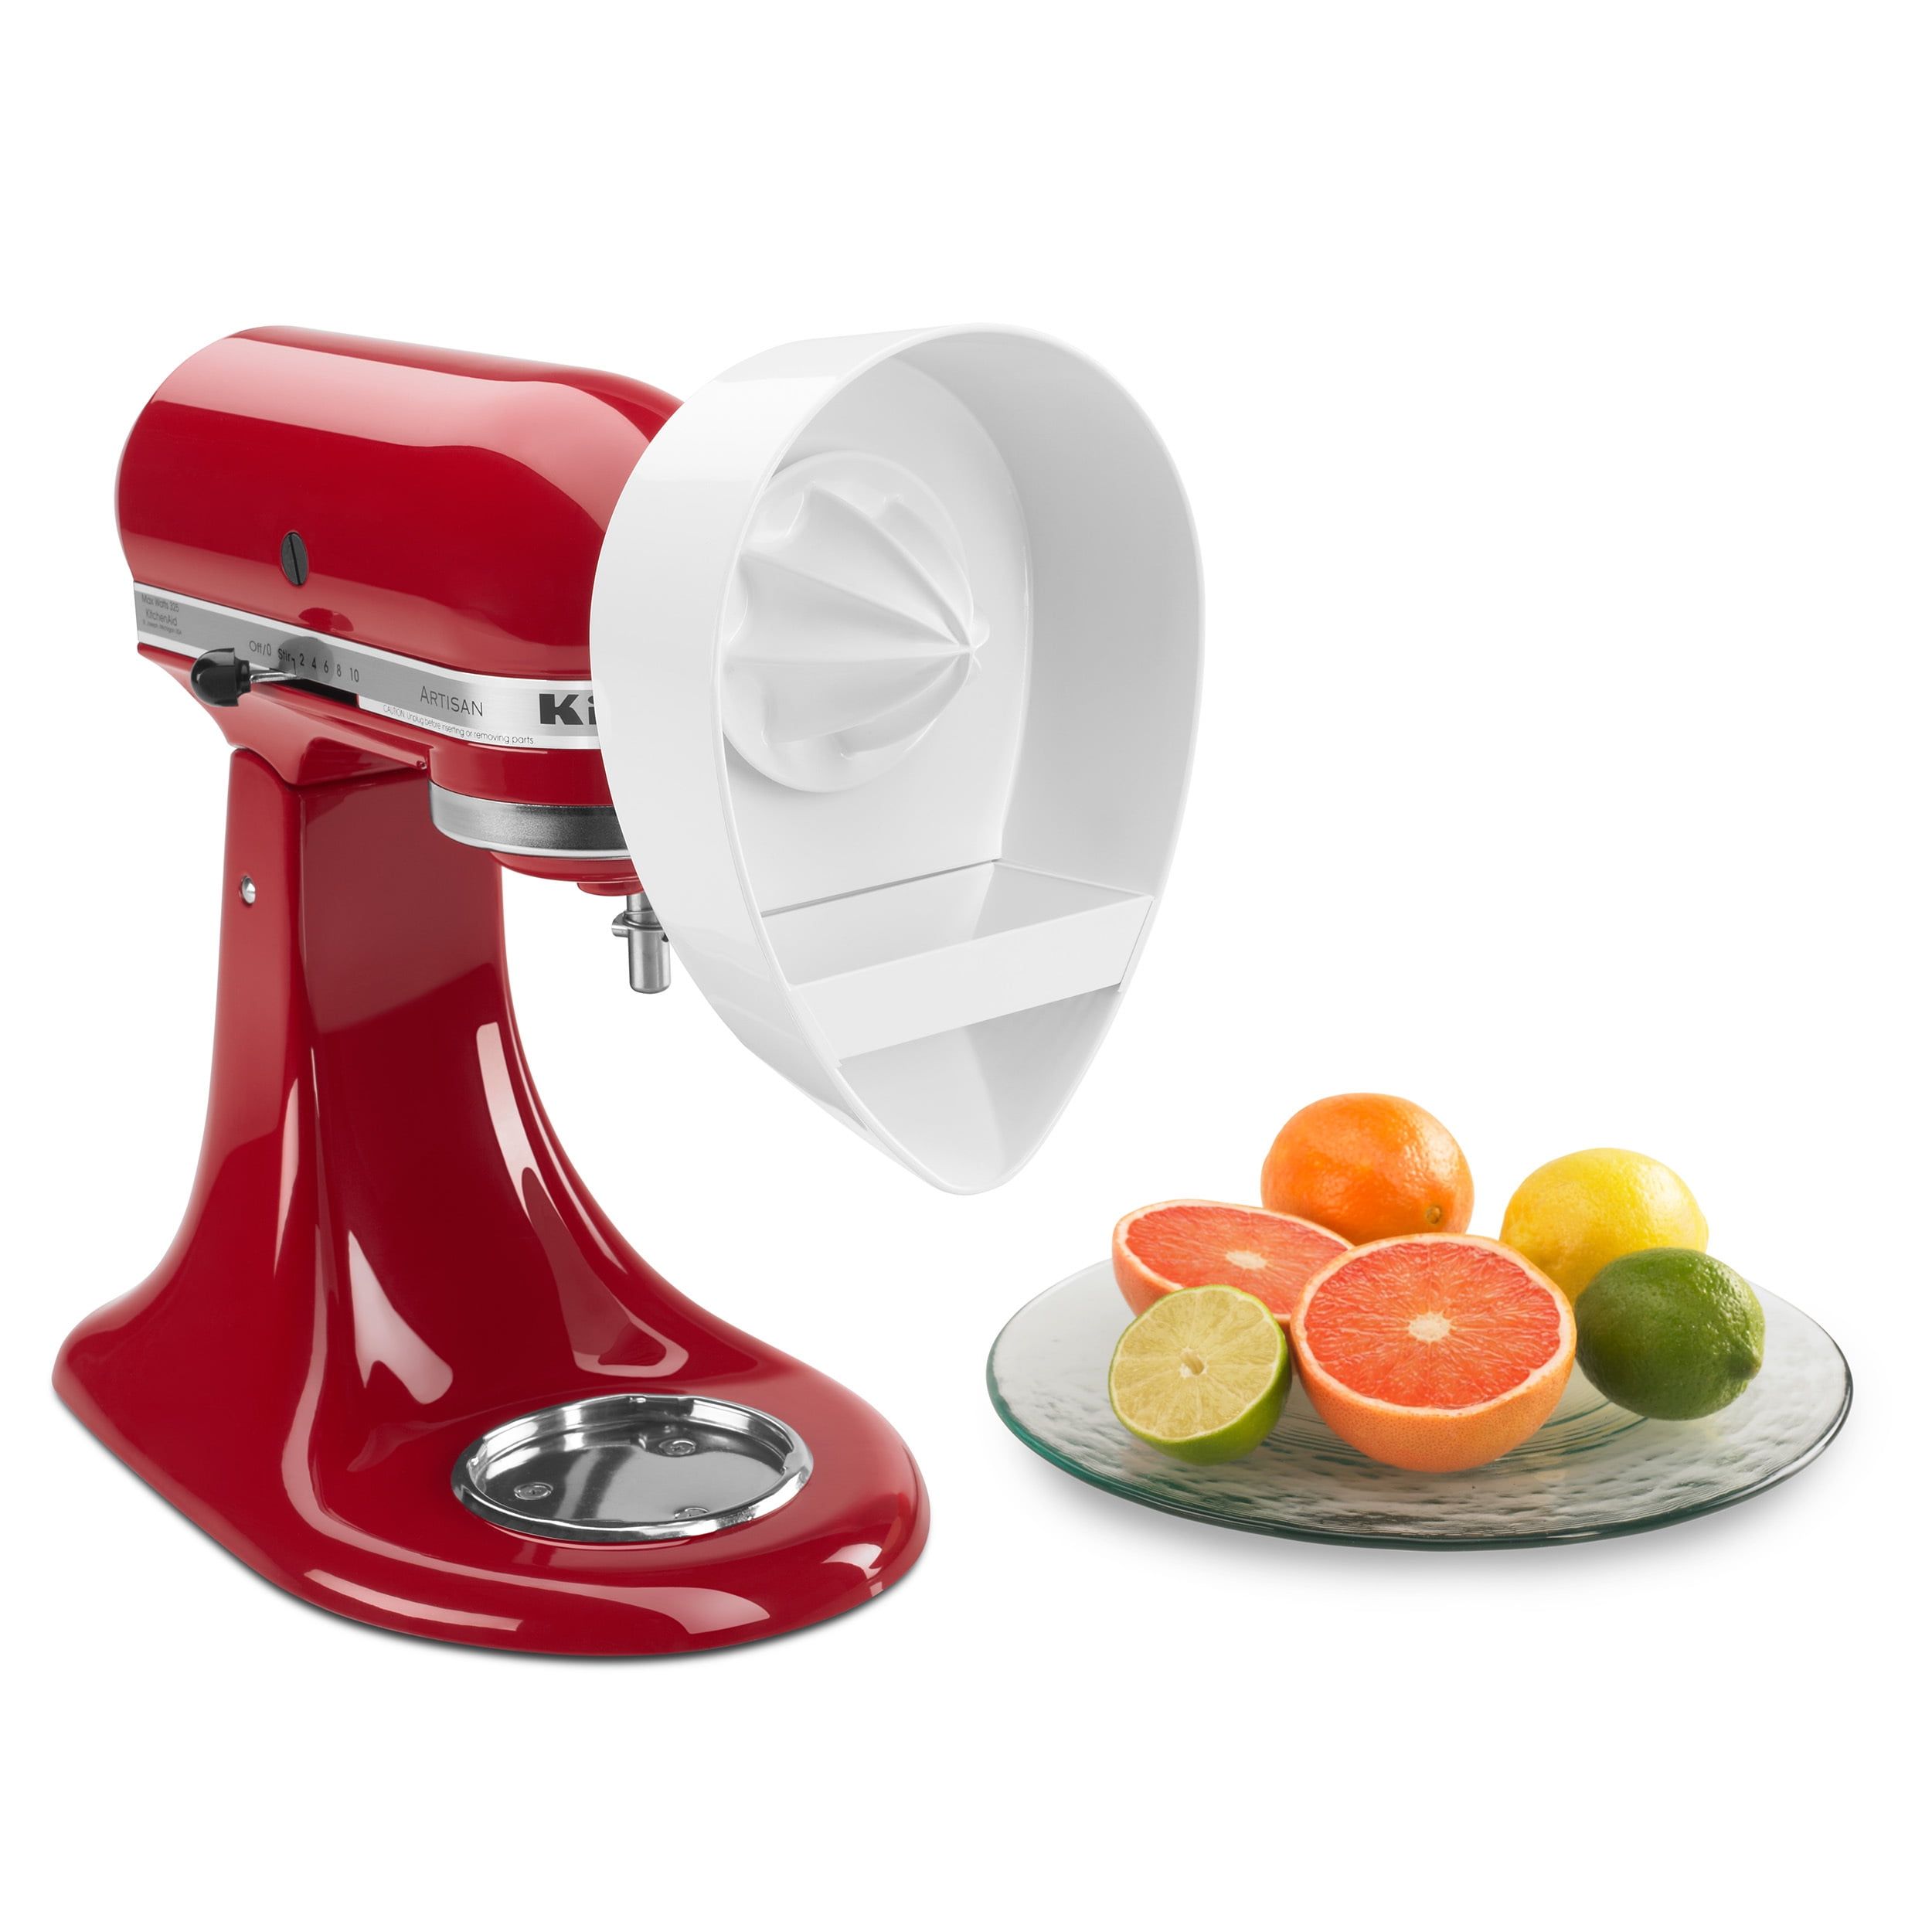  COFUN Juicer Attachment for KitchenAid Stand Mixer, For Kitchen  Aid Juicer Attachment With Two Sizes of Reamer, Juicer Attachment Used to  Squeeze Lemons, Oranges, Limes And Other Fresh Citrus Fruit: Home